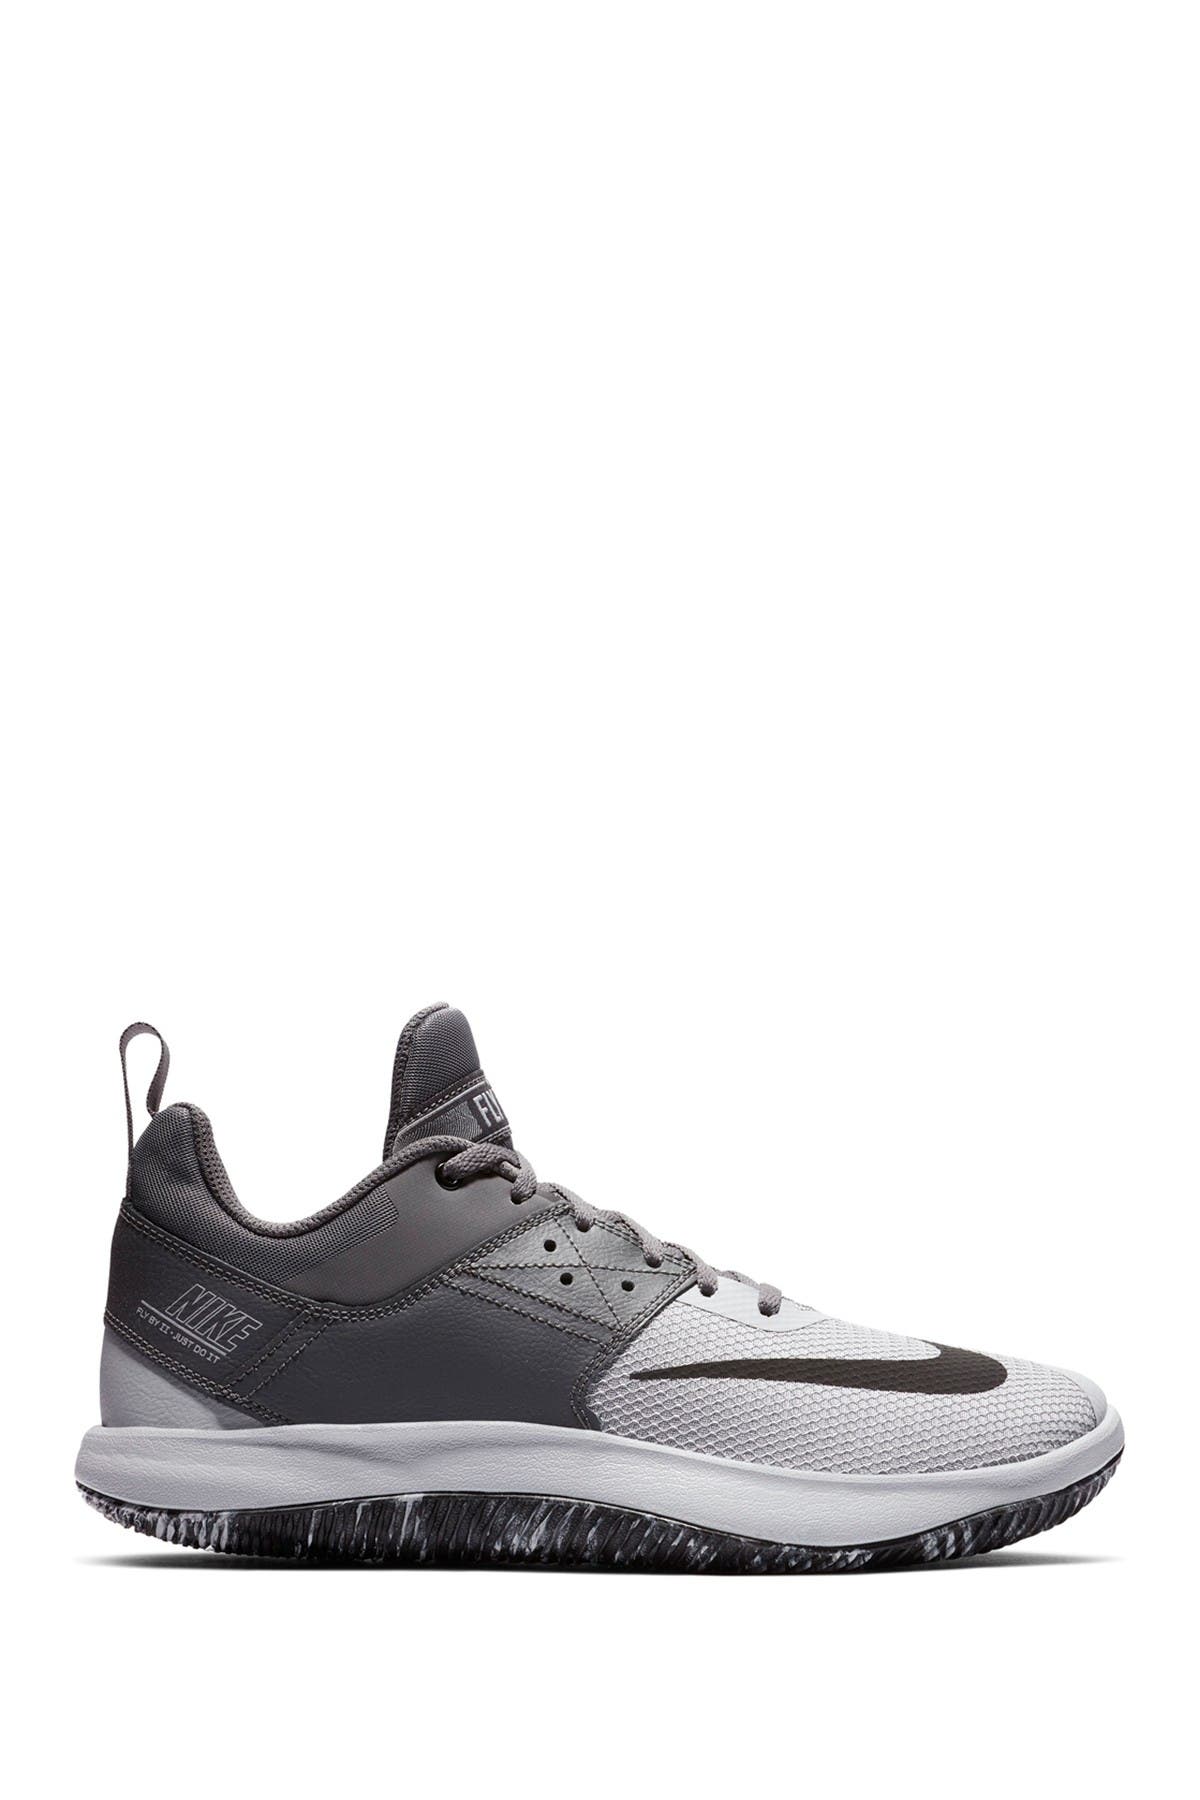 nike fly by low mens basketball shoes